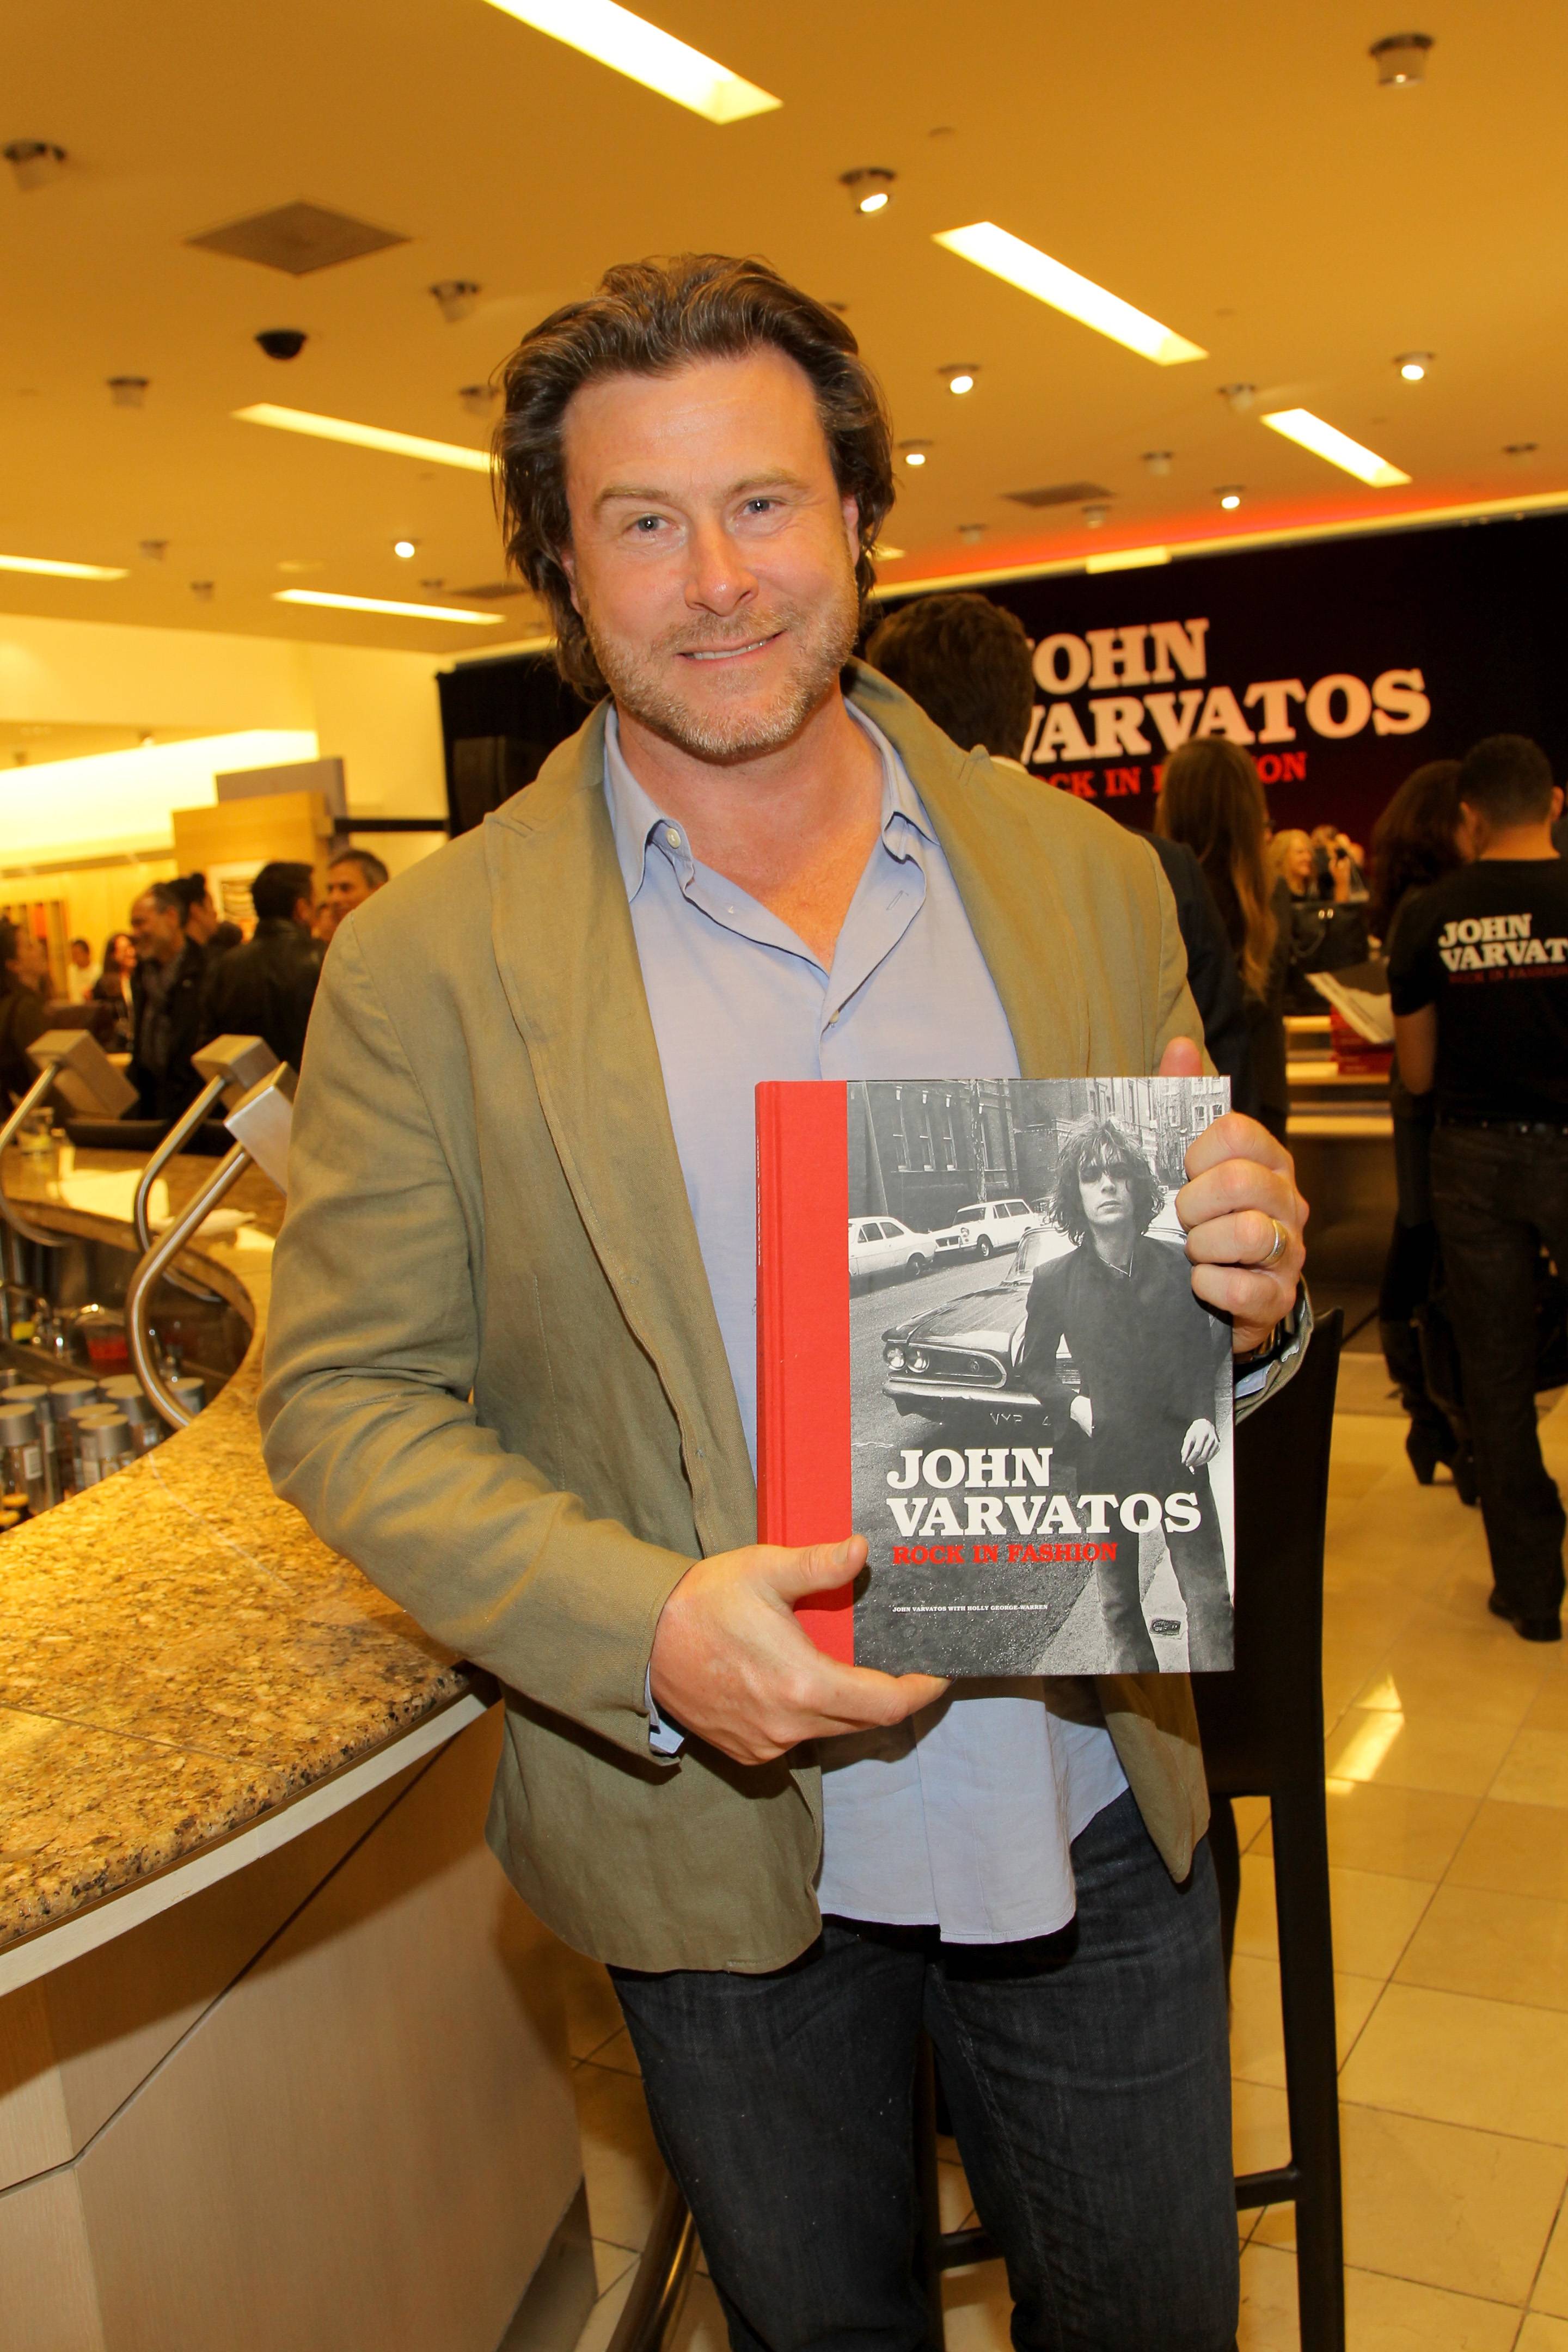 Neiman Marcus Welcomes John Varvatos To Celebrate The Launch Of His Book 